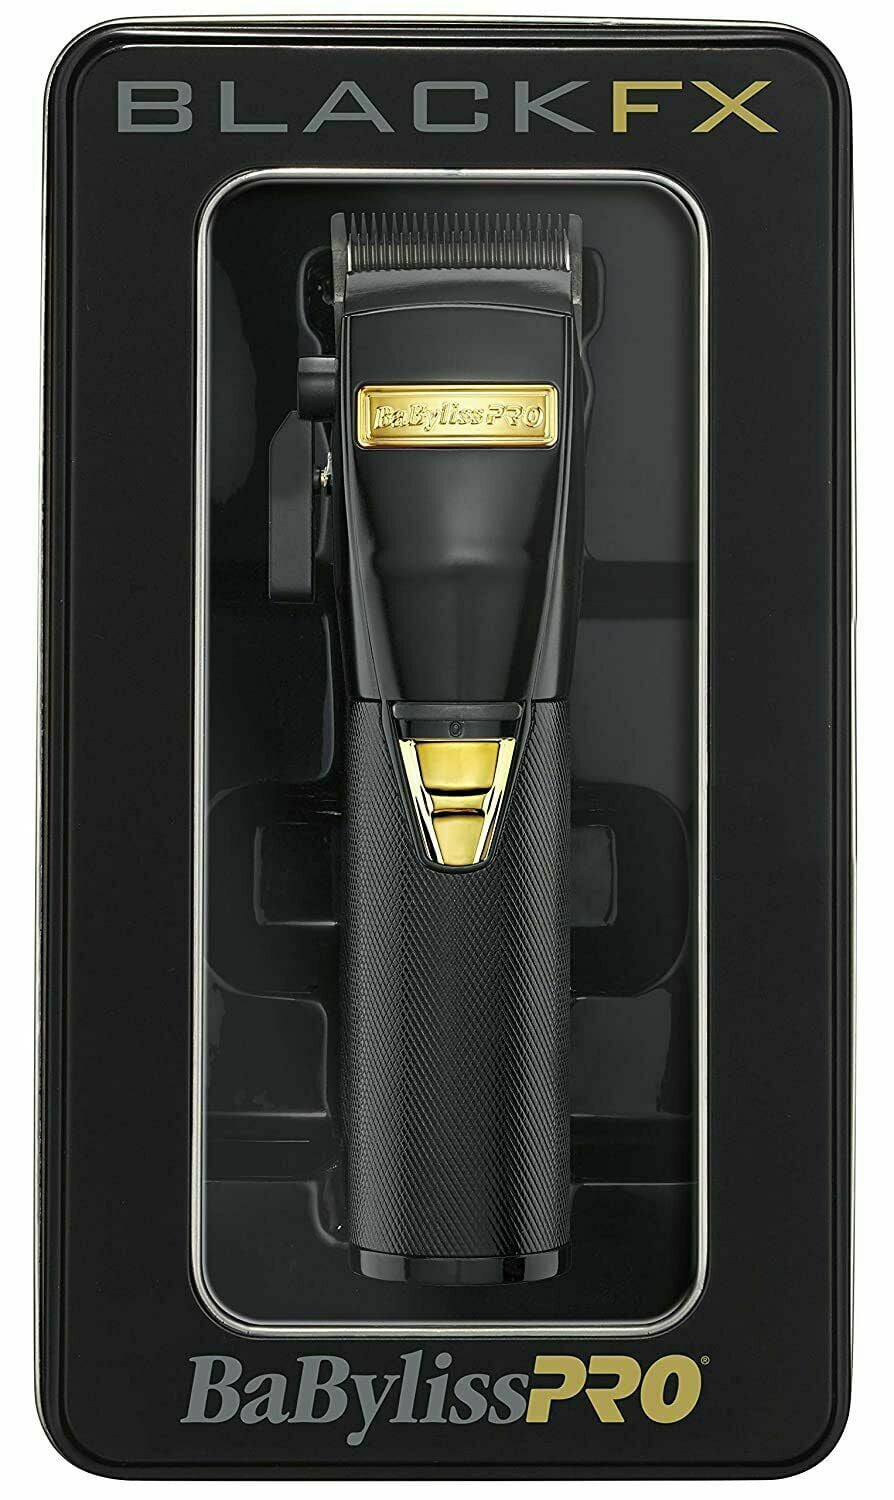 black and gold babyliss trimmer